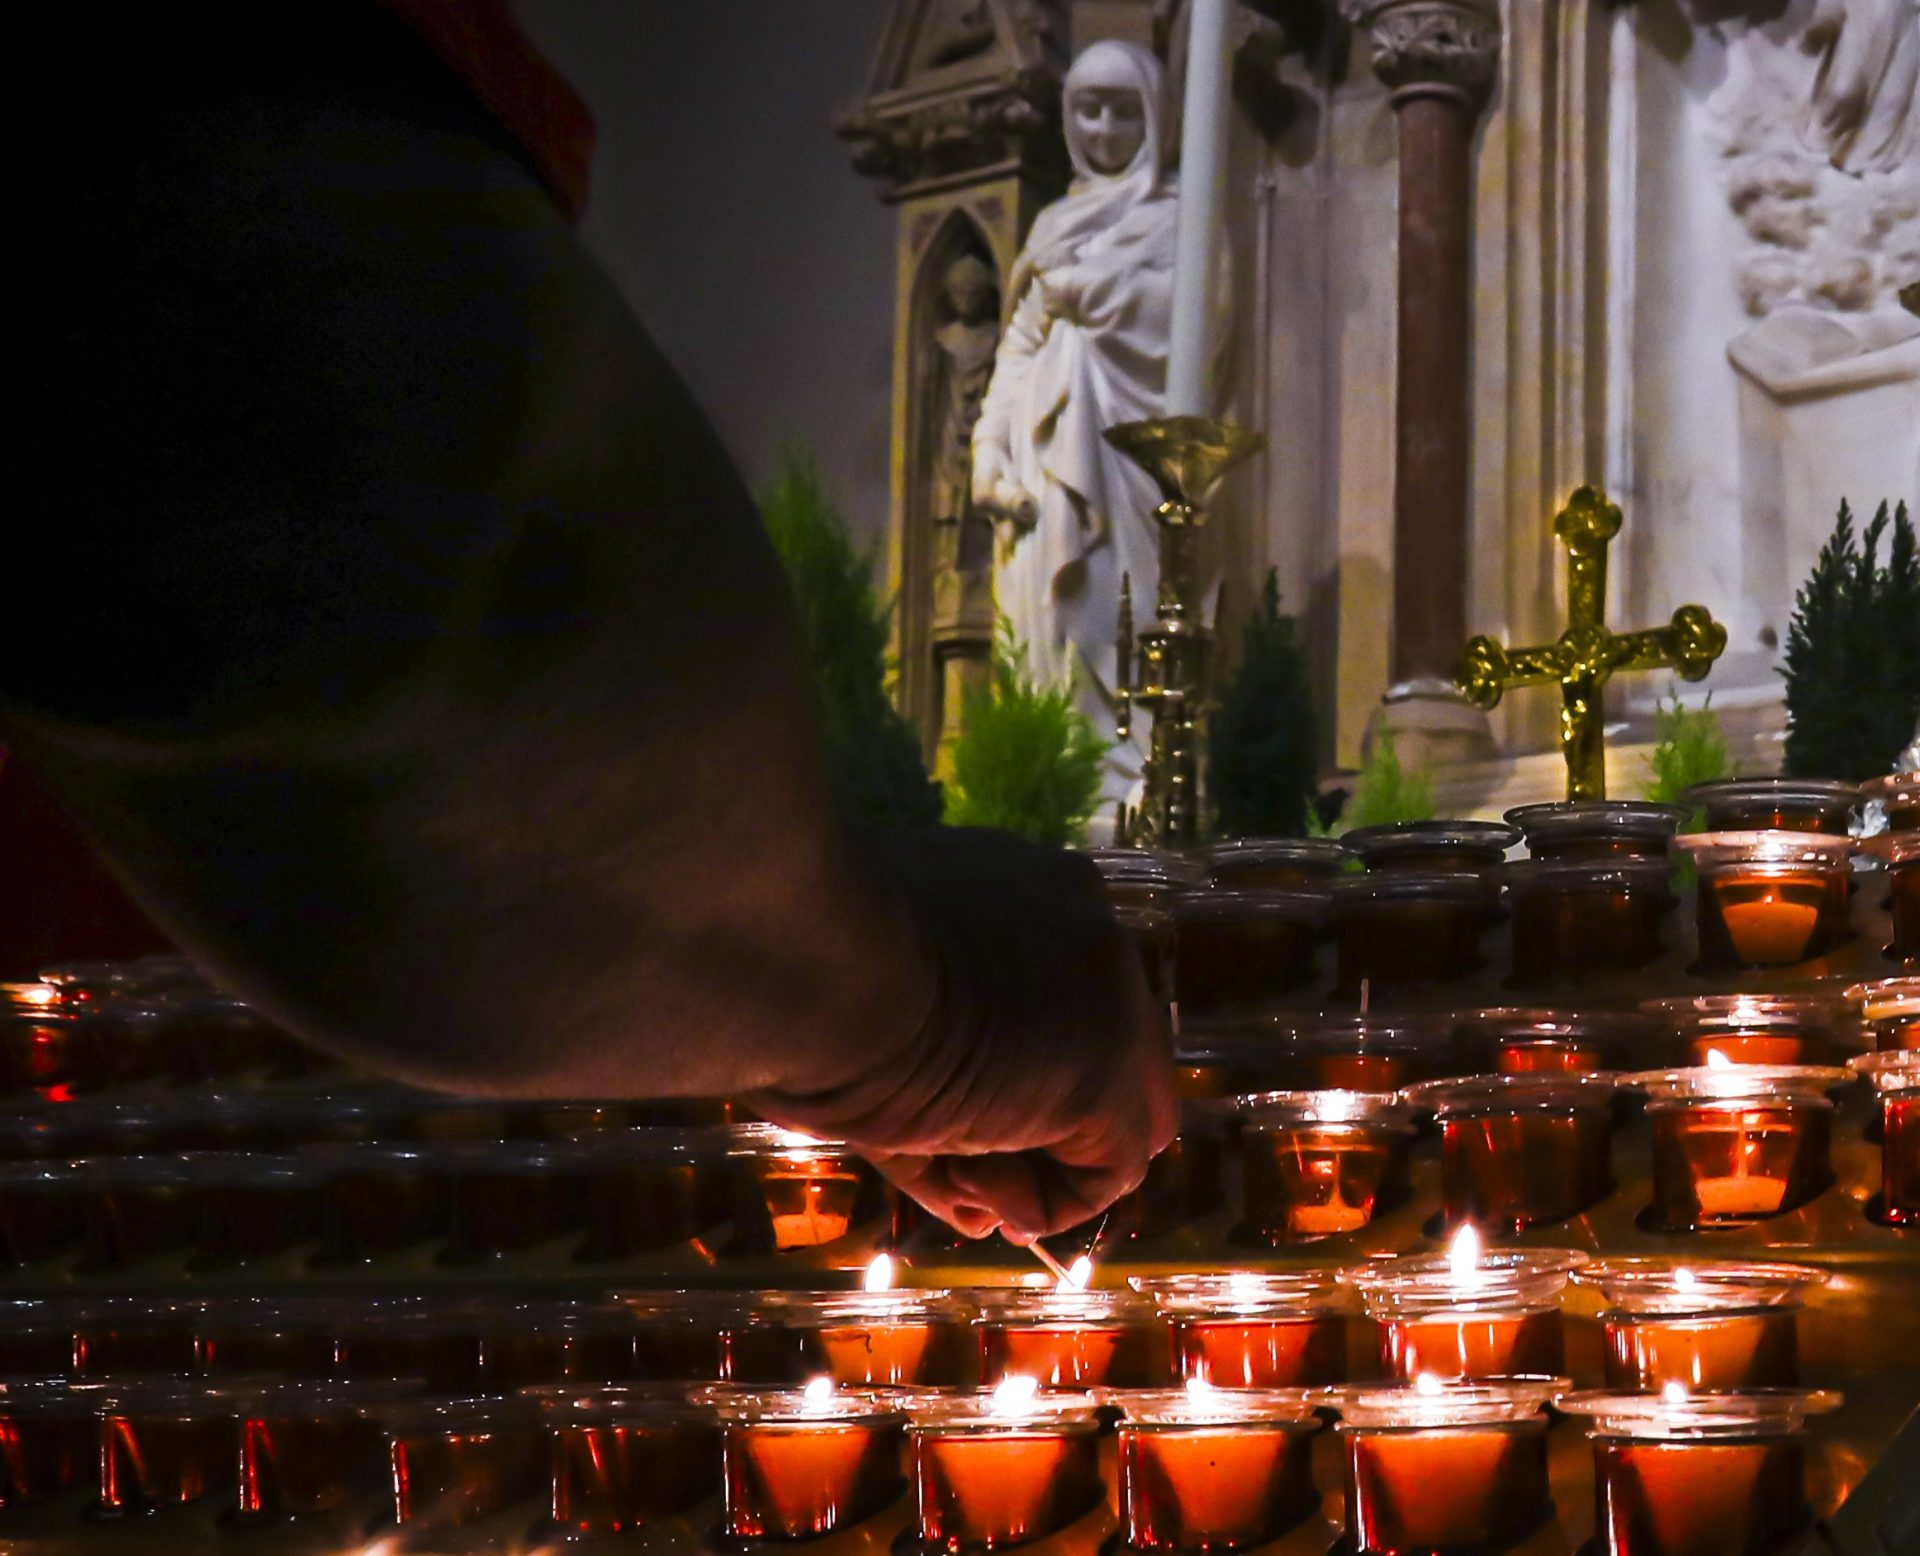 In this Wednesday, Nov. 27, 2019, photo, a Catholic faithful lights candles at a prayer station during a visit to one of the great symbols of the Roman Catholic Church, St. Patrick's Cathedral, in New York. Catholic dioceses are facing a new wave of sexual abuse lawsuits after multiple states extended or suspended the statute of limitations to allow claims stretching back decades. In 2016, New York Archbishop Timothy Dolan established a fund to compensate victims.